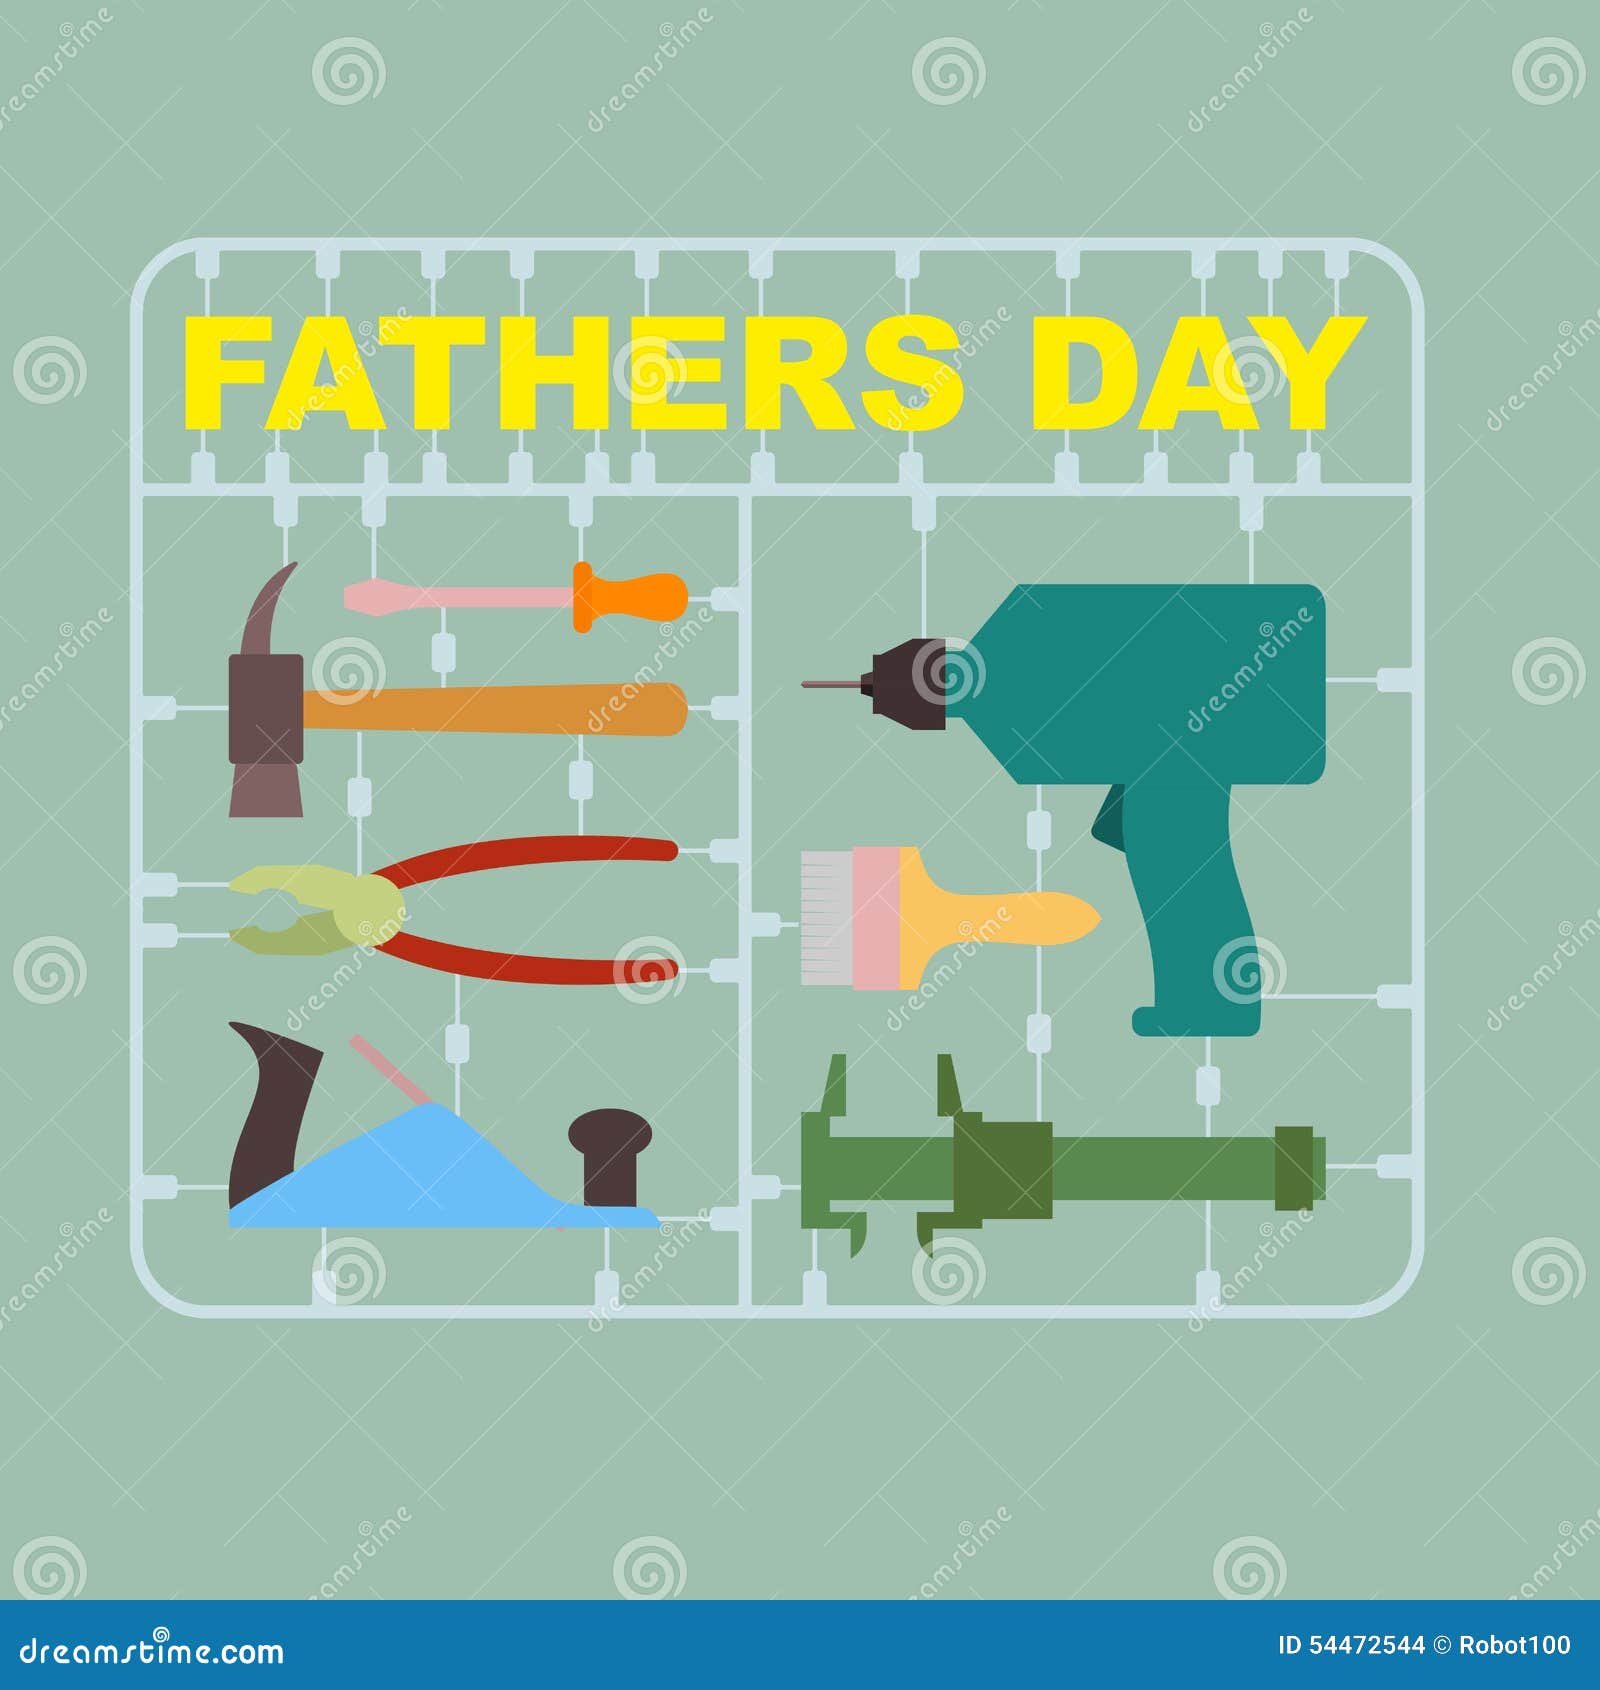 Download Fathers Day. A Set Of Tools For Men: Drill And Hammer ...